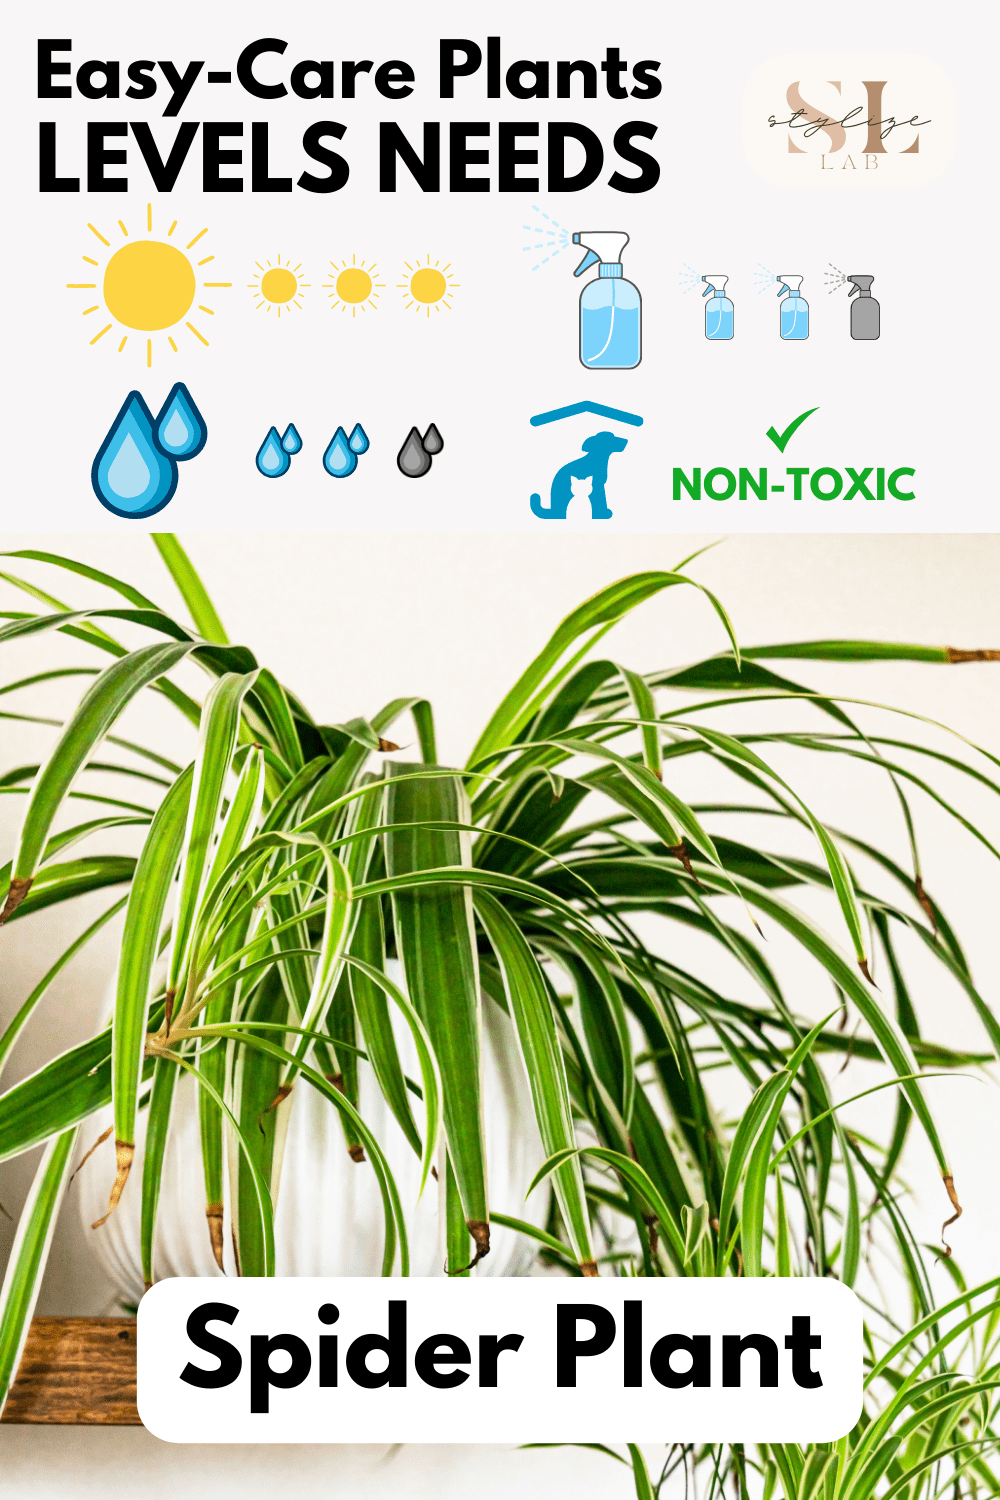 Spider Plant Level Needs ligh, water, humidity, non-toxic for pets